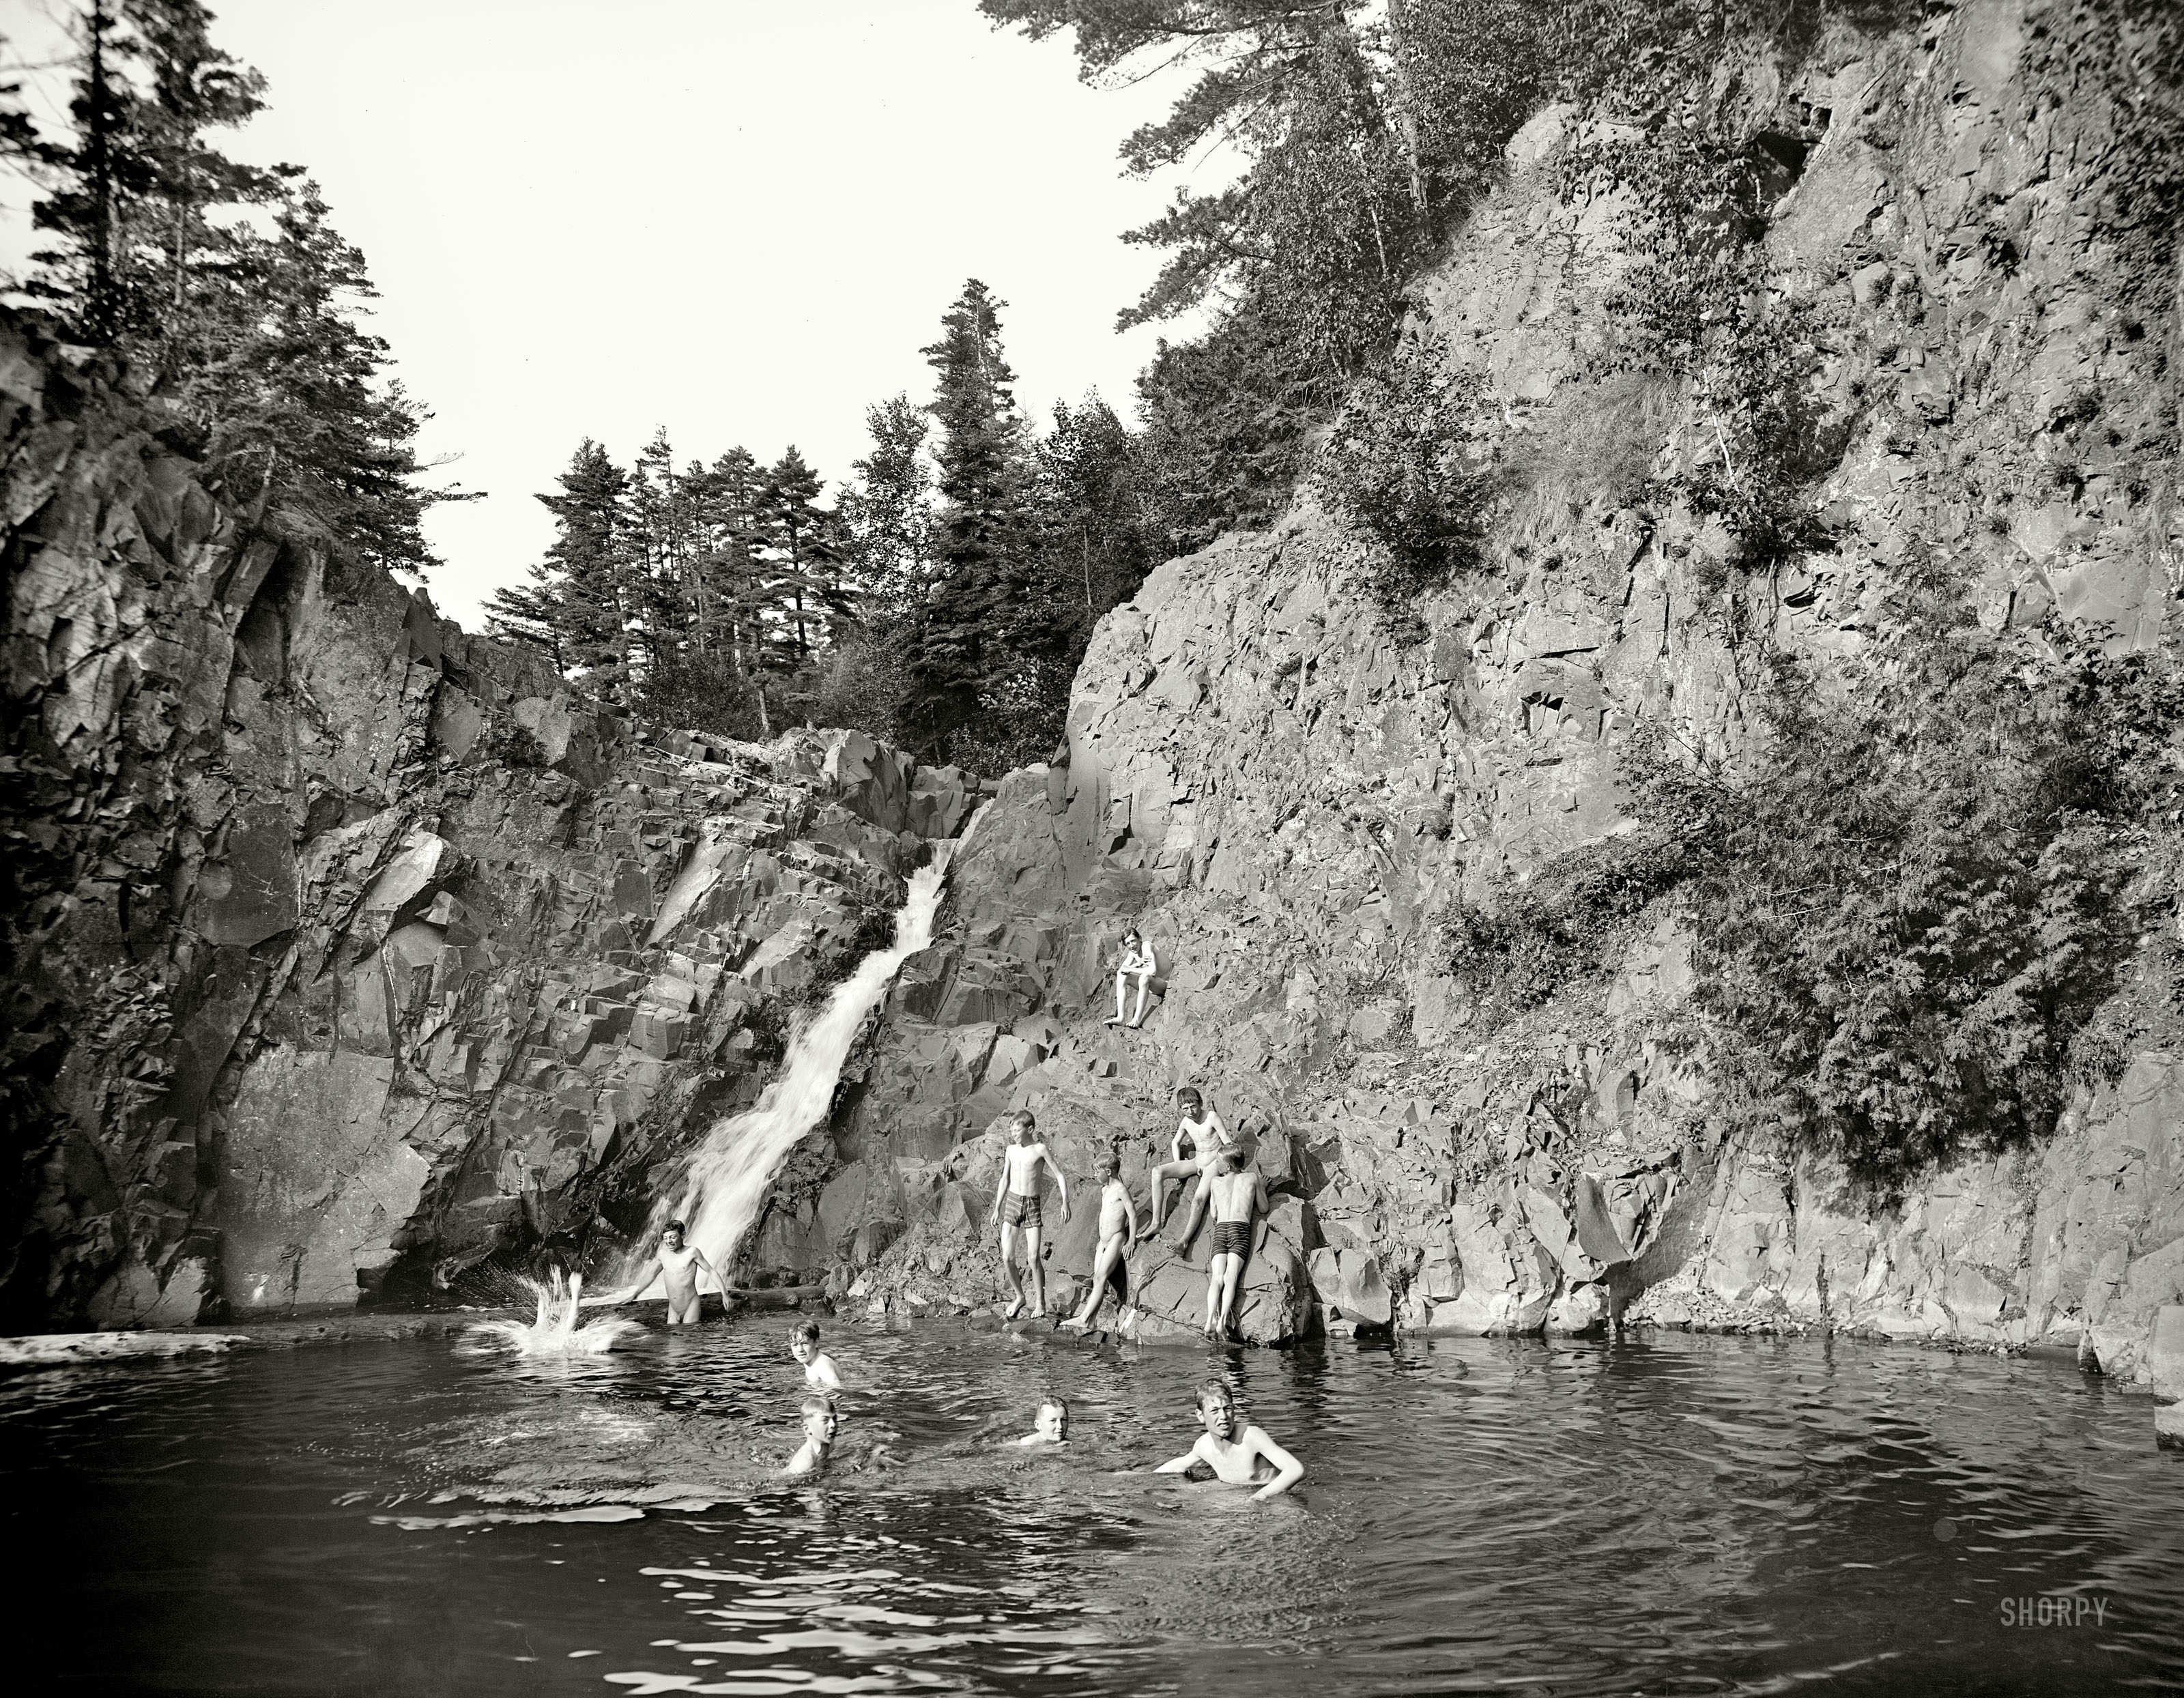 Duluth, Minnesota, circa 1904. "A swimming hole, Lester Park." 8x10 inch dry plate glass negative, Detroit Publishing Company. View full size.